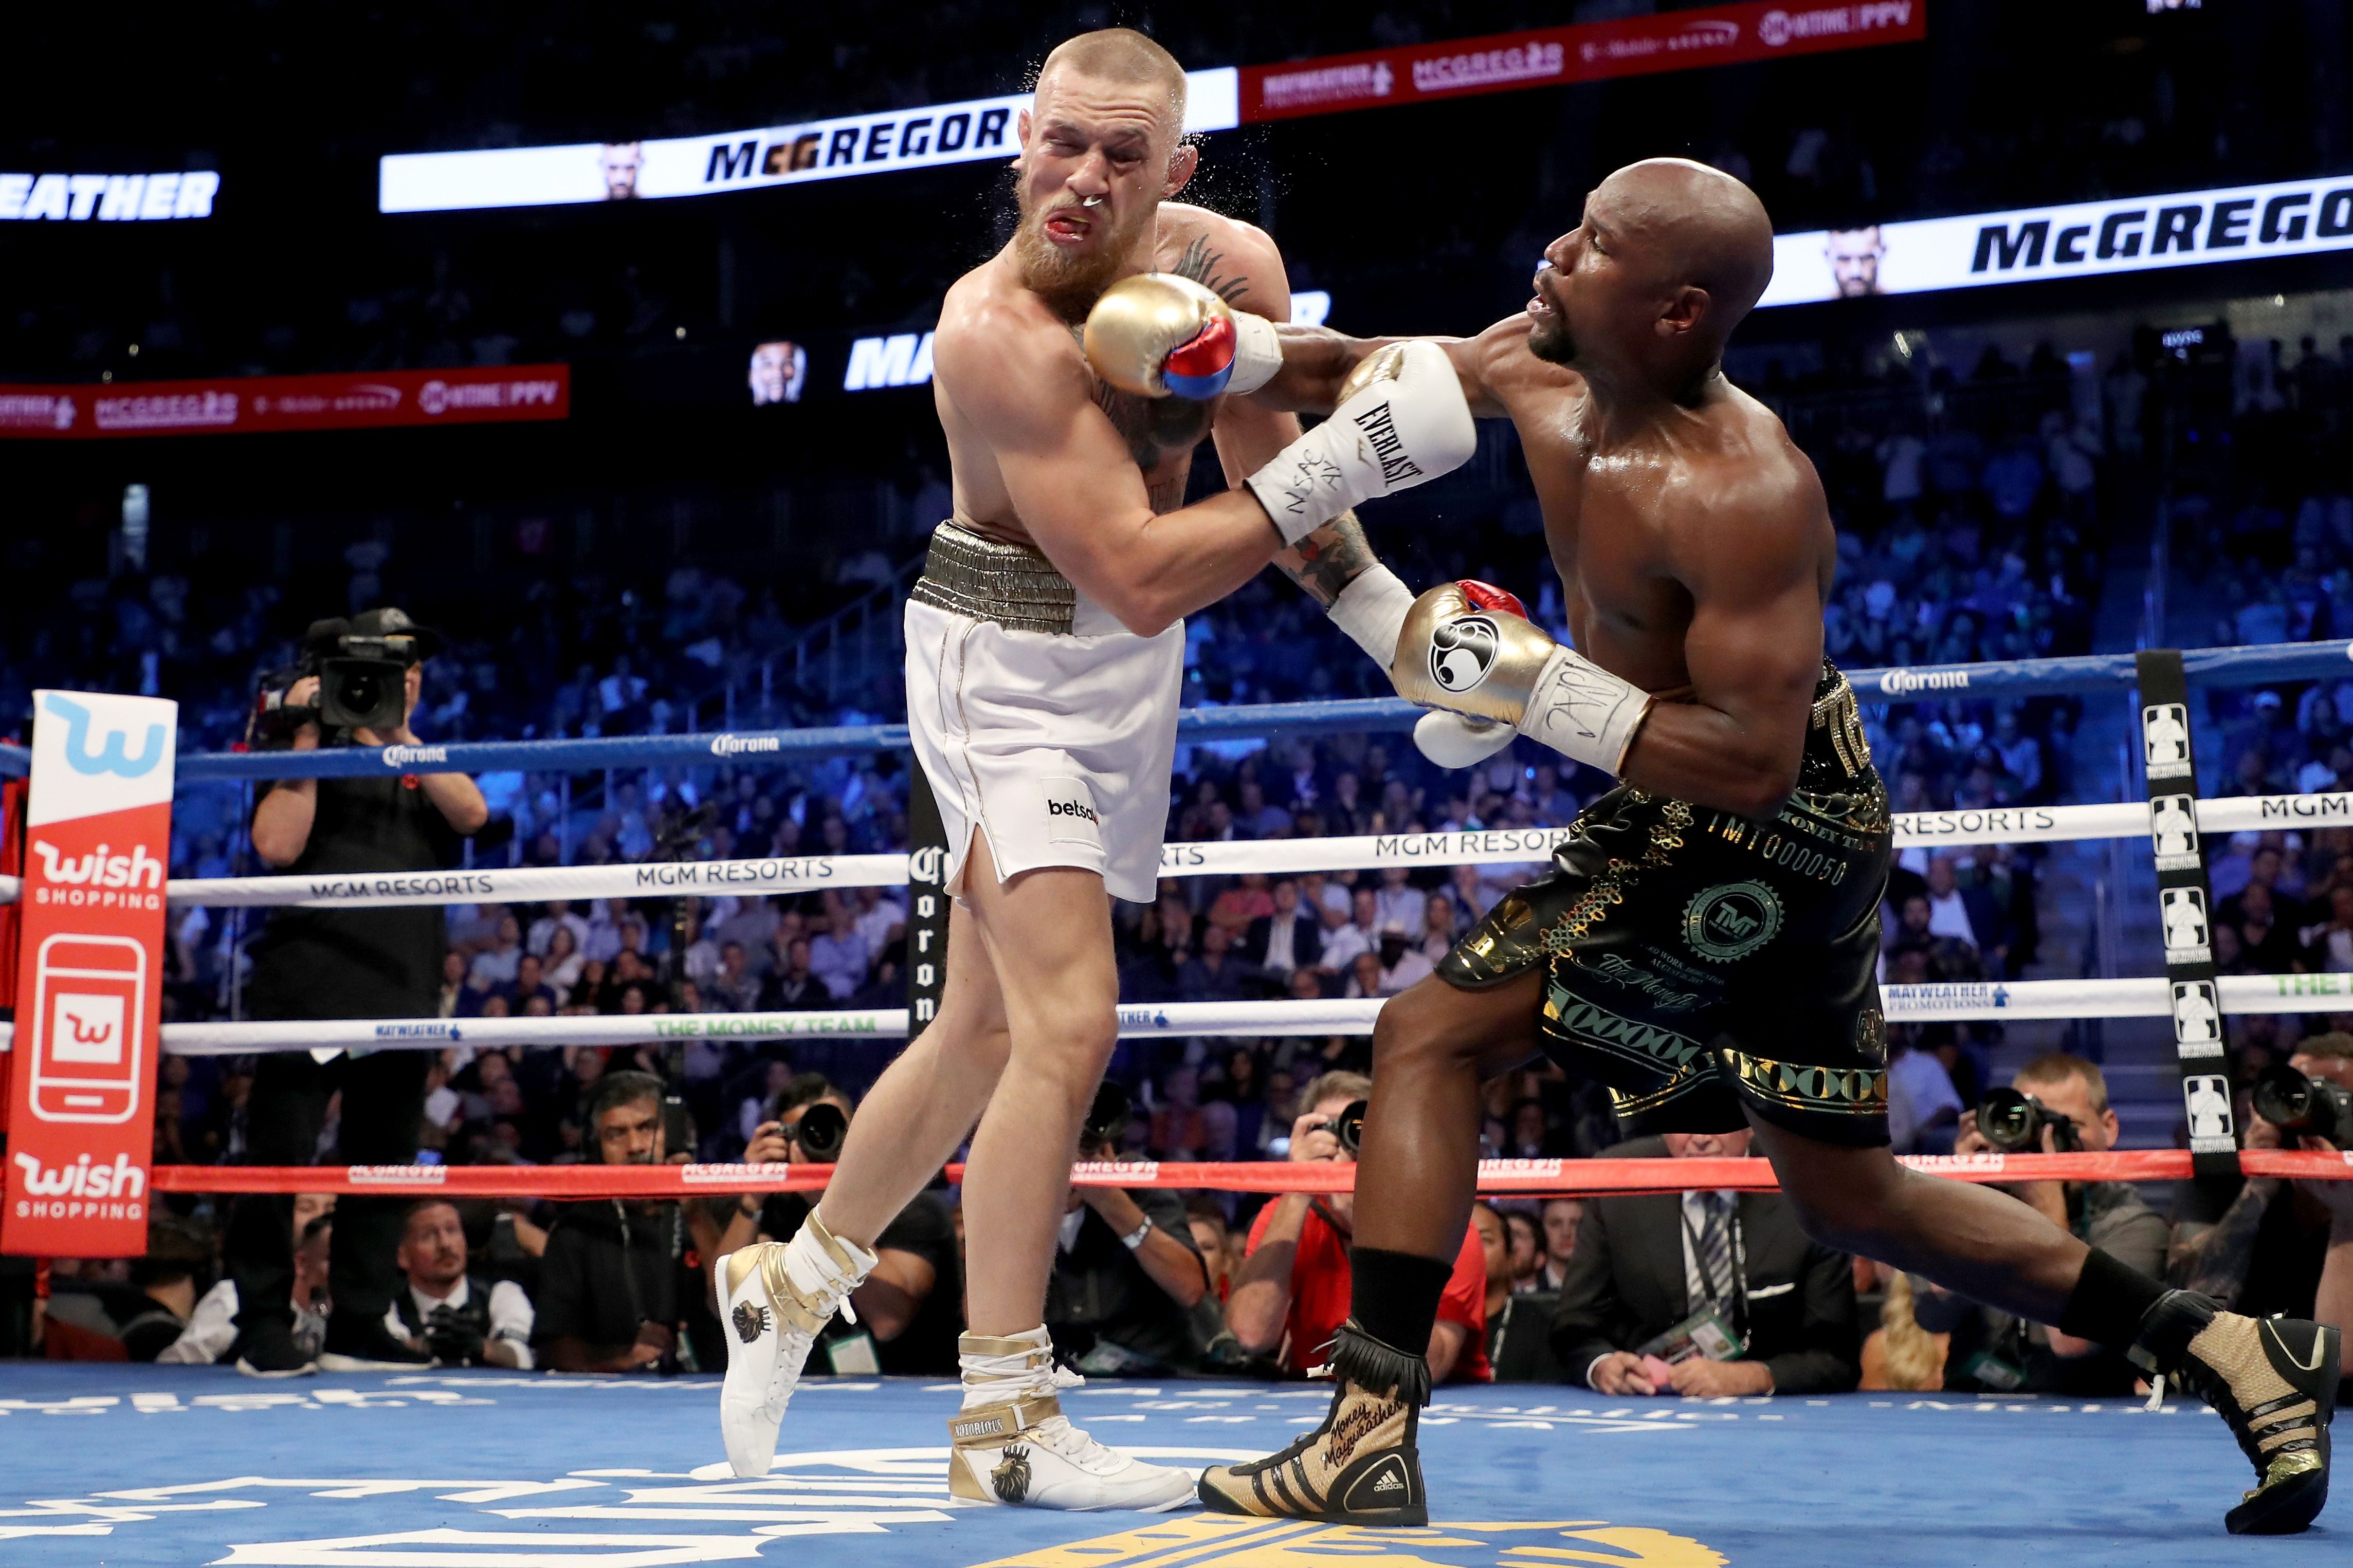 Floyd Mayweather lands a punch on Conor McGregor